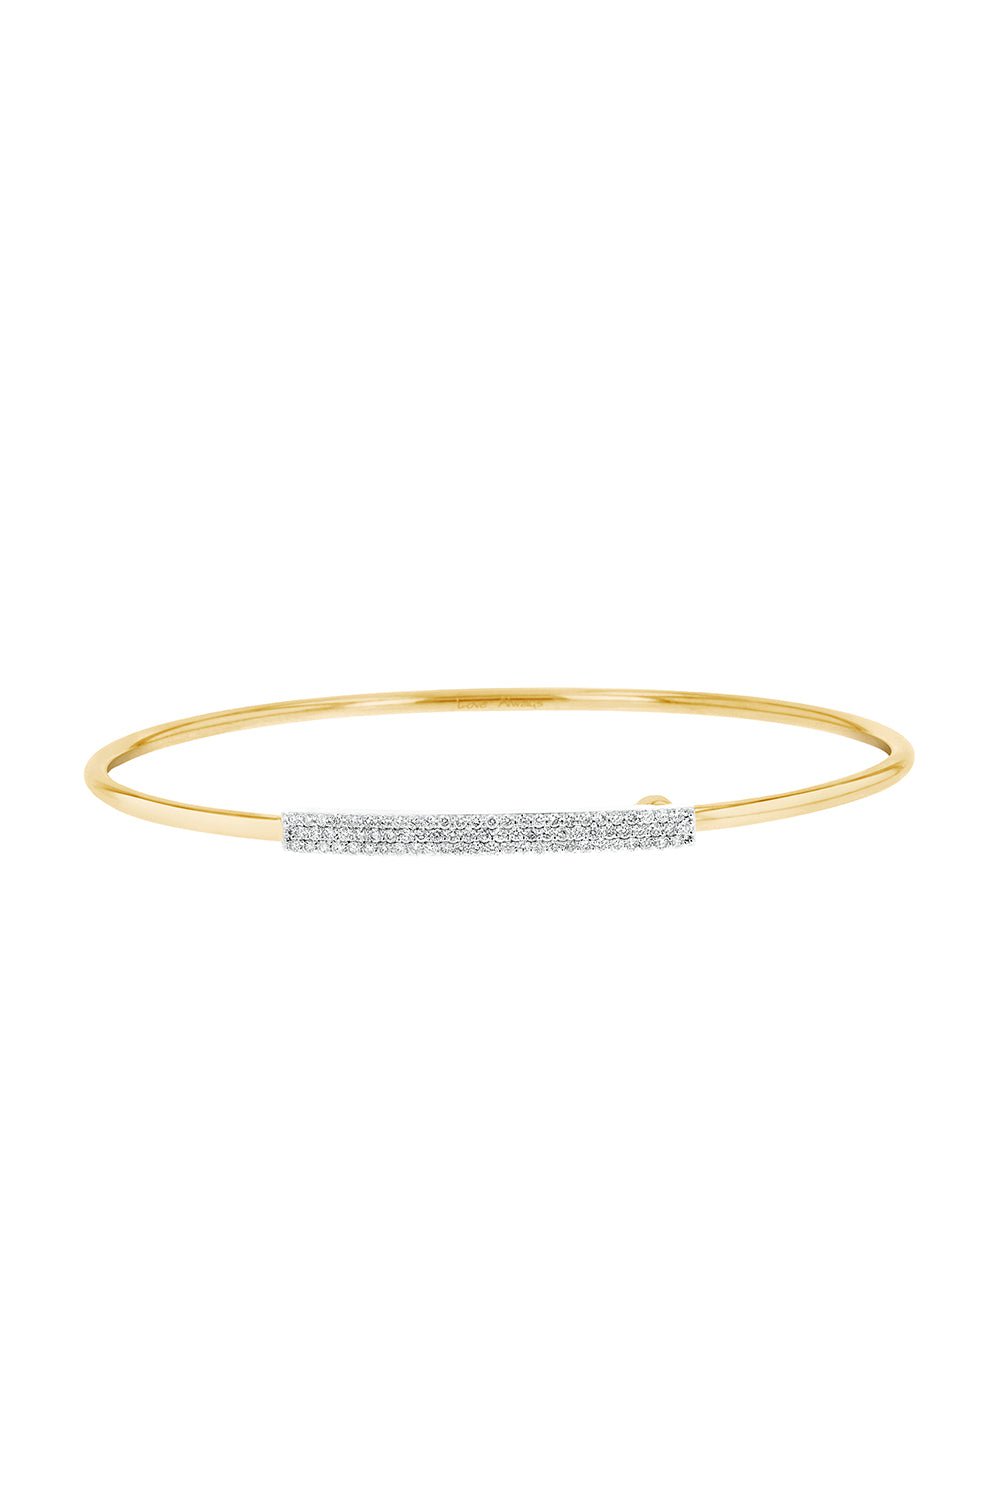 PHILLIPS HOUSE-Wire Love Always Bracelet-YELLOW GOLD